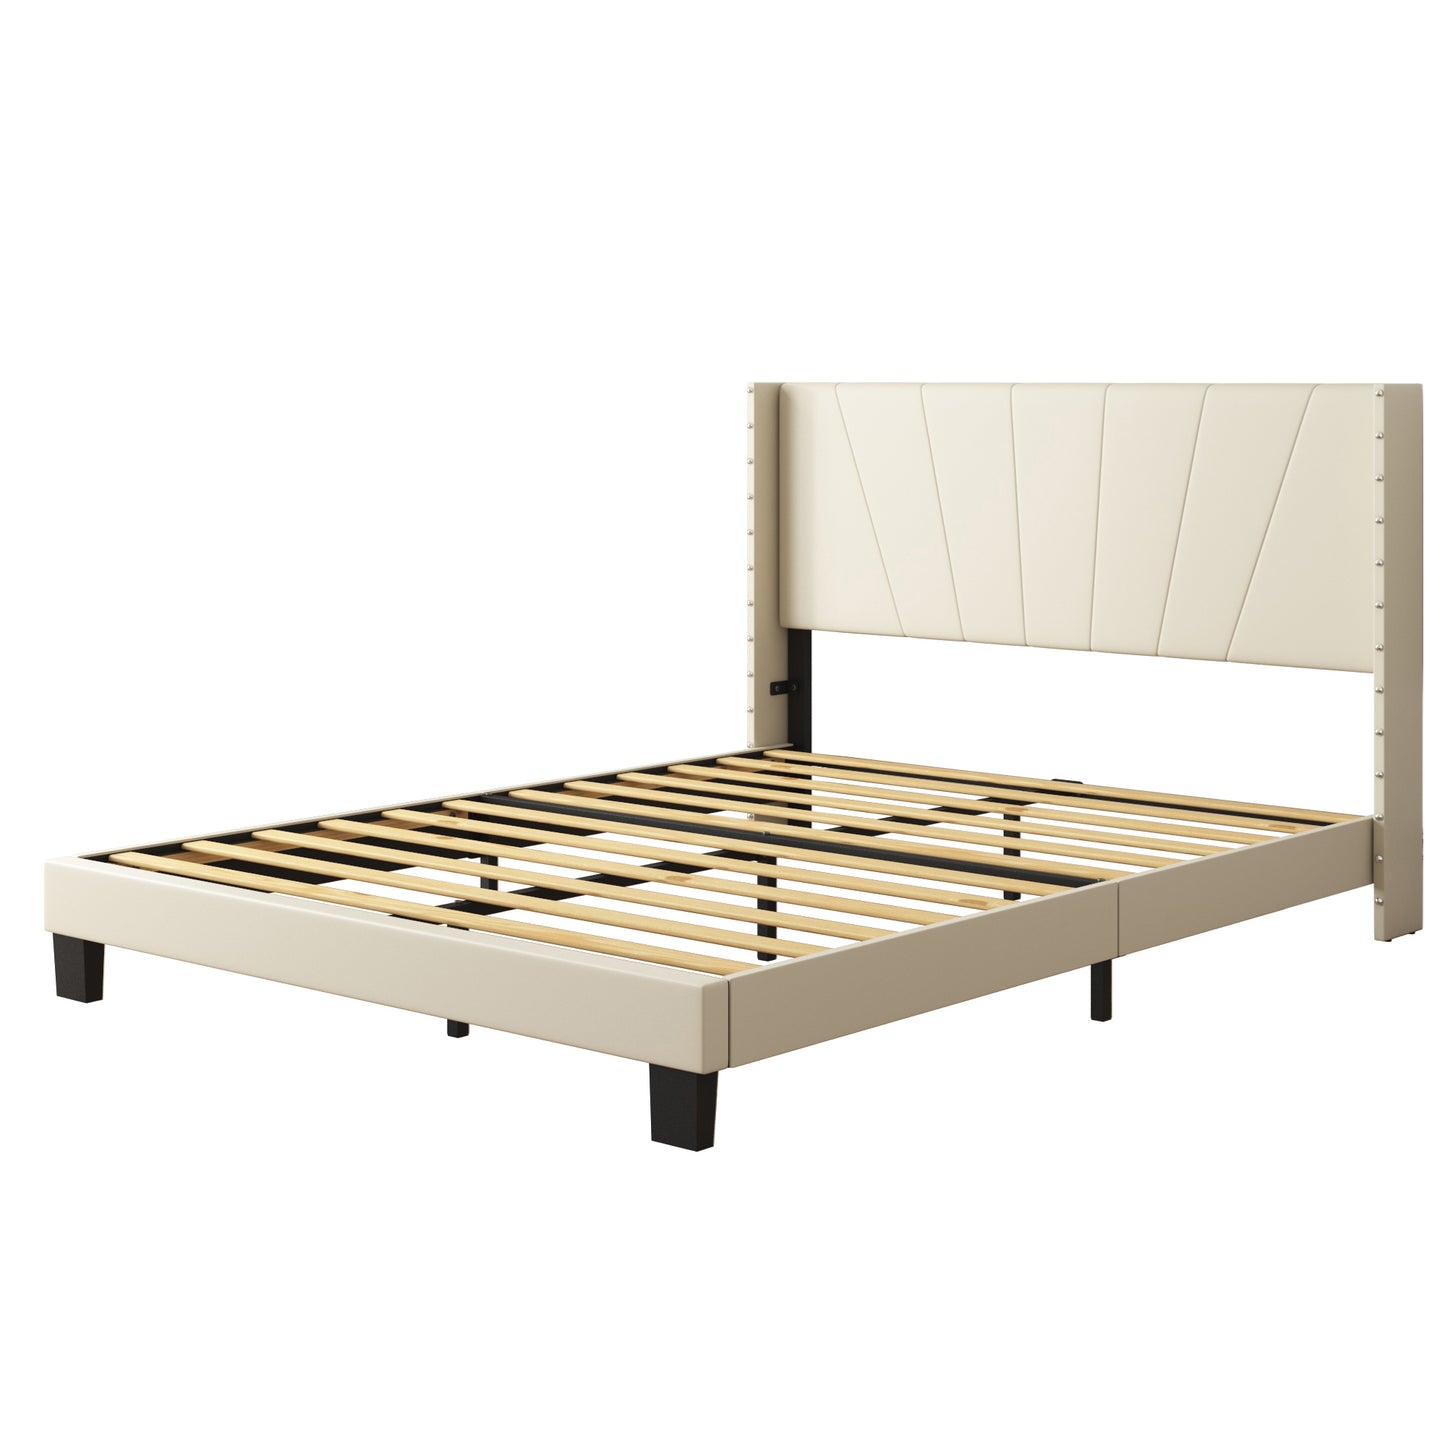 SYNGAR Queen Size Fabric Upholstered Platform Bed Frame with Rivet Wingback Headboard, Mattress Foundation, Metal Frame, Strong Wood Slat Support for Kids Teens Adults, No Box Spring Needed, Beige